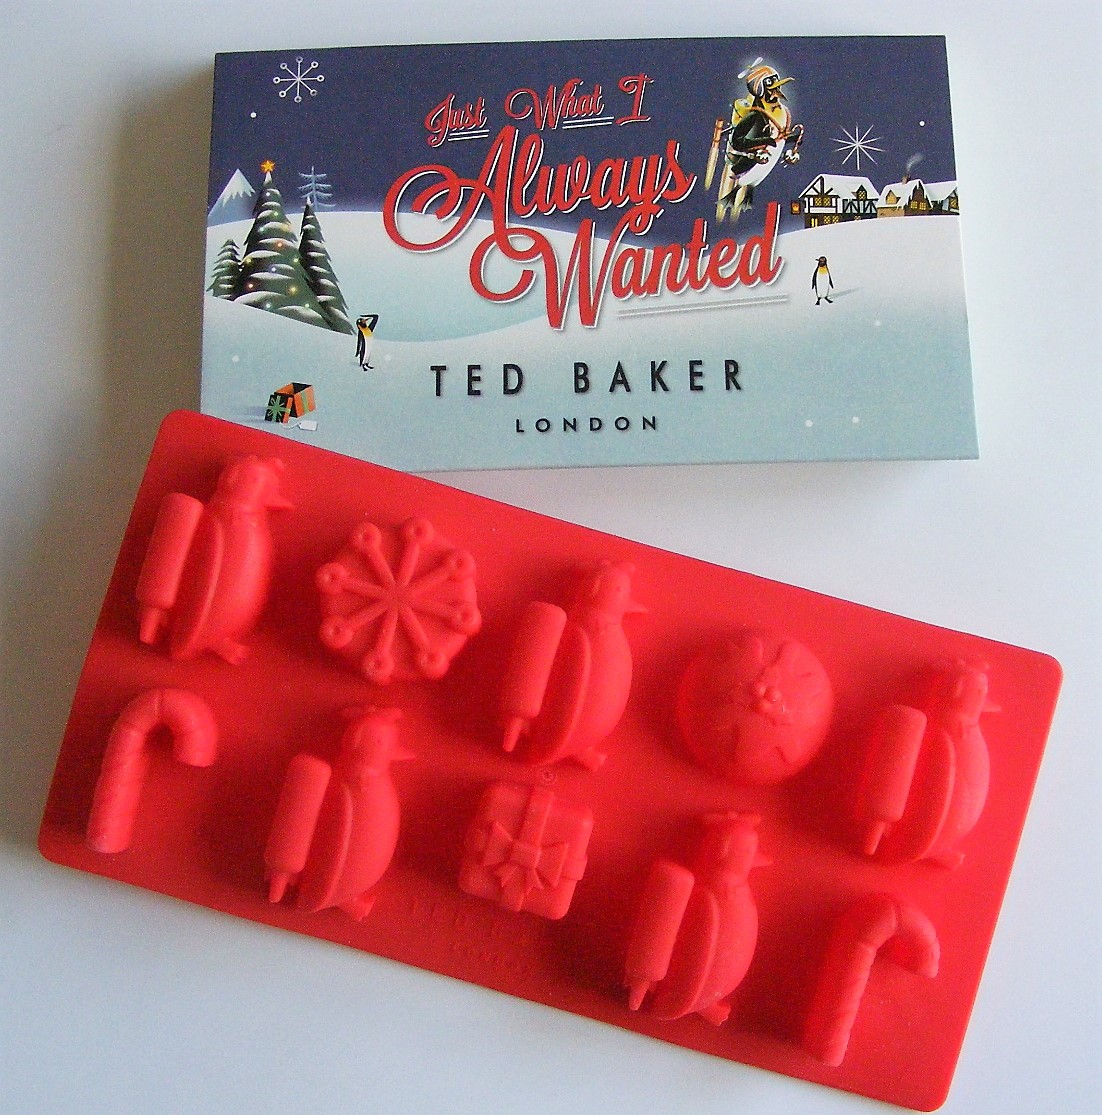 Ted Baker London Christmas Ice Cube Tray New and unused